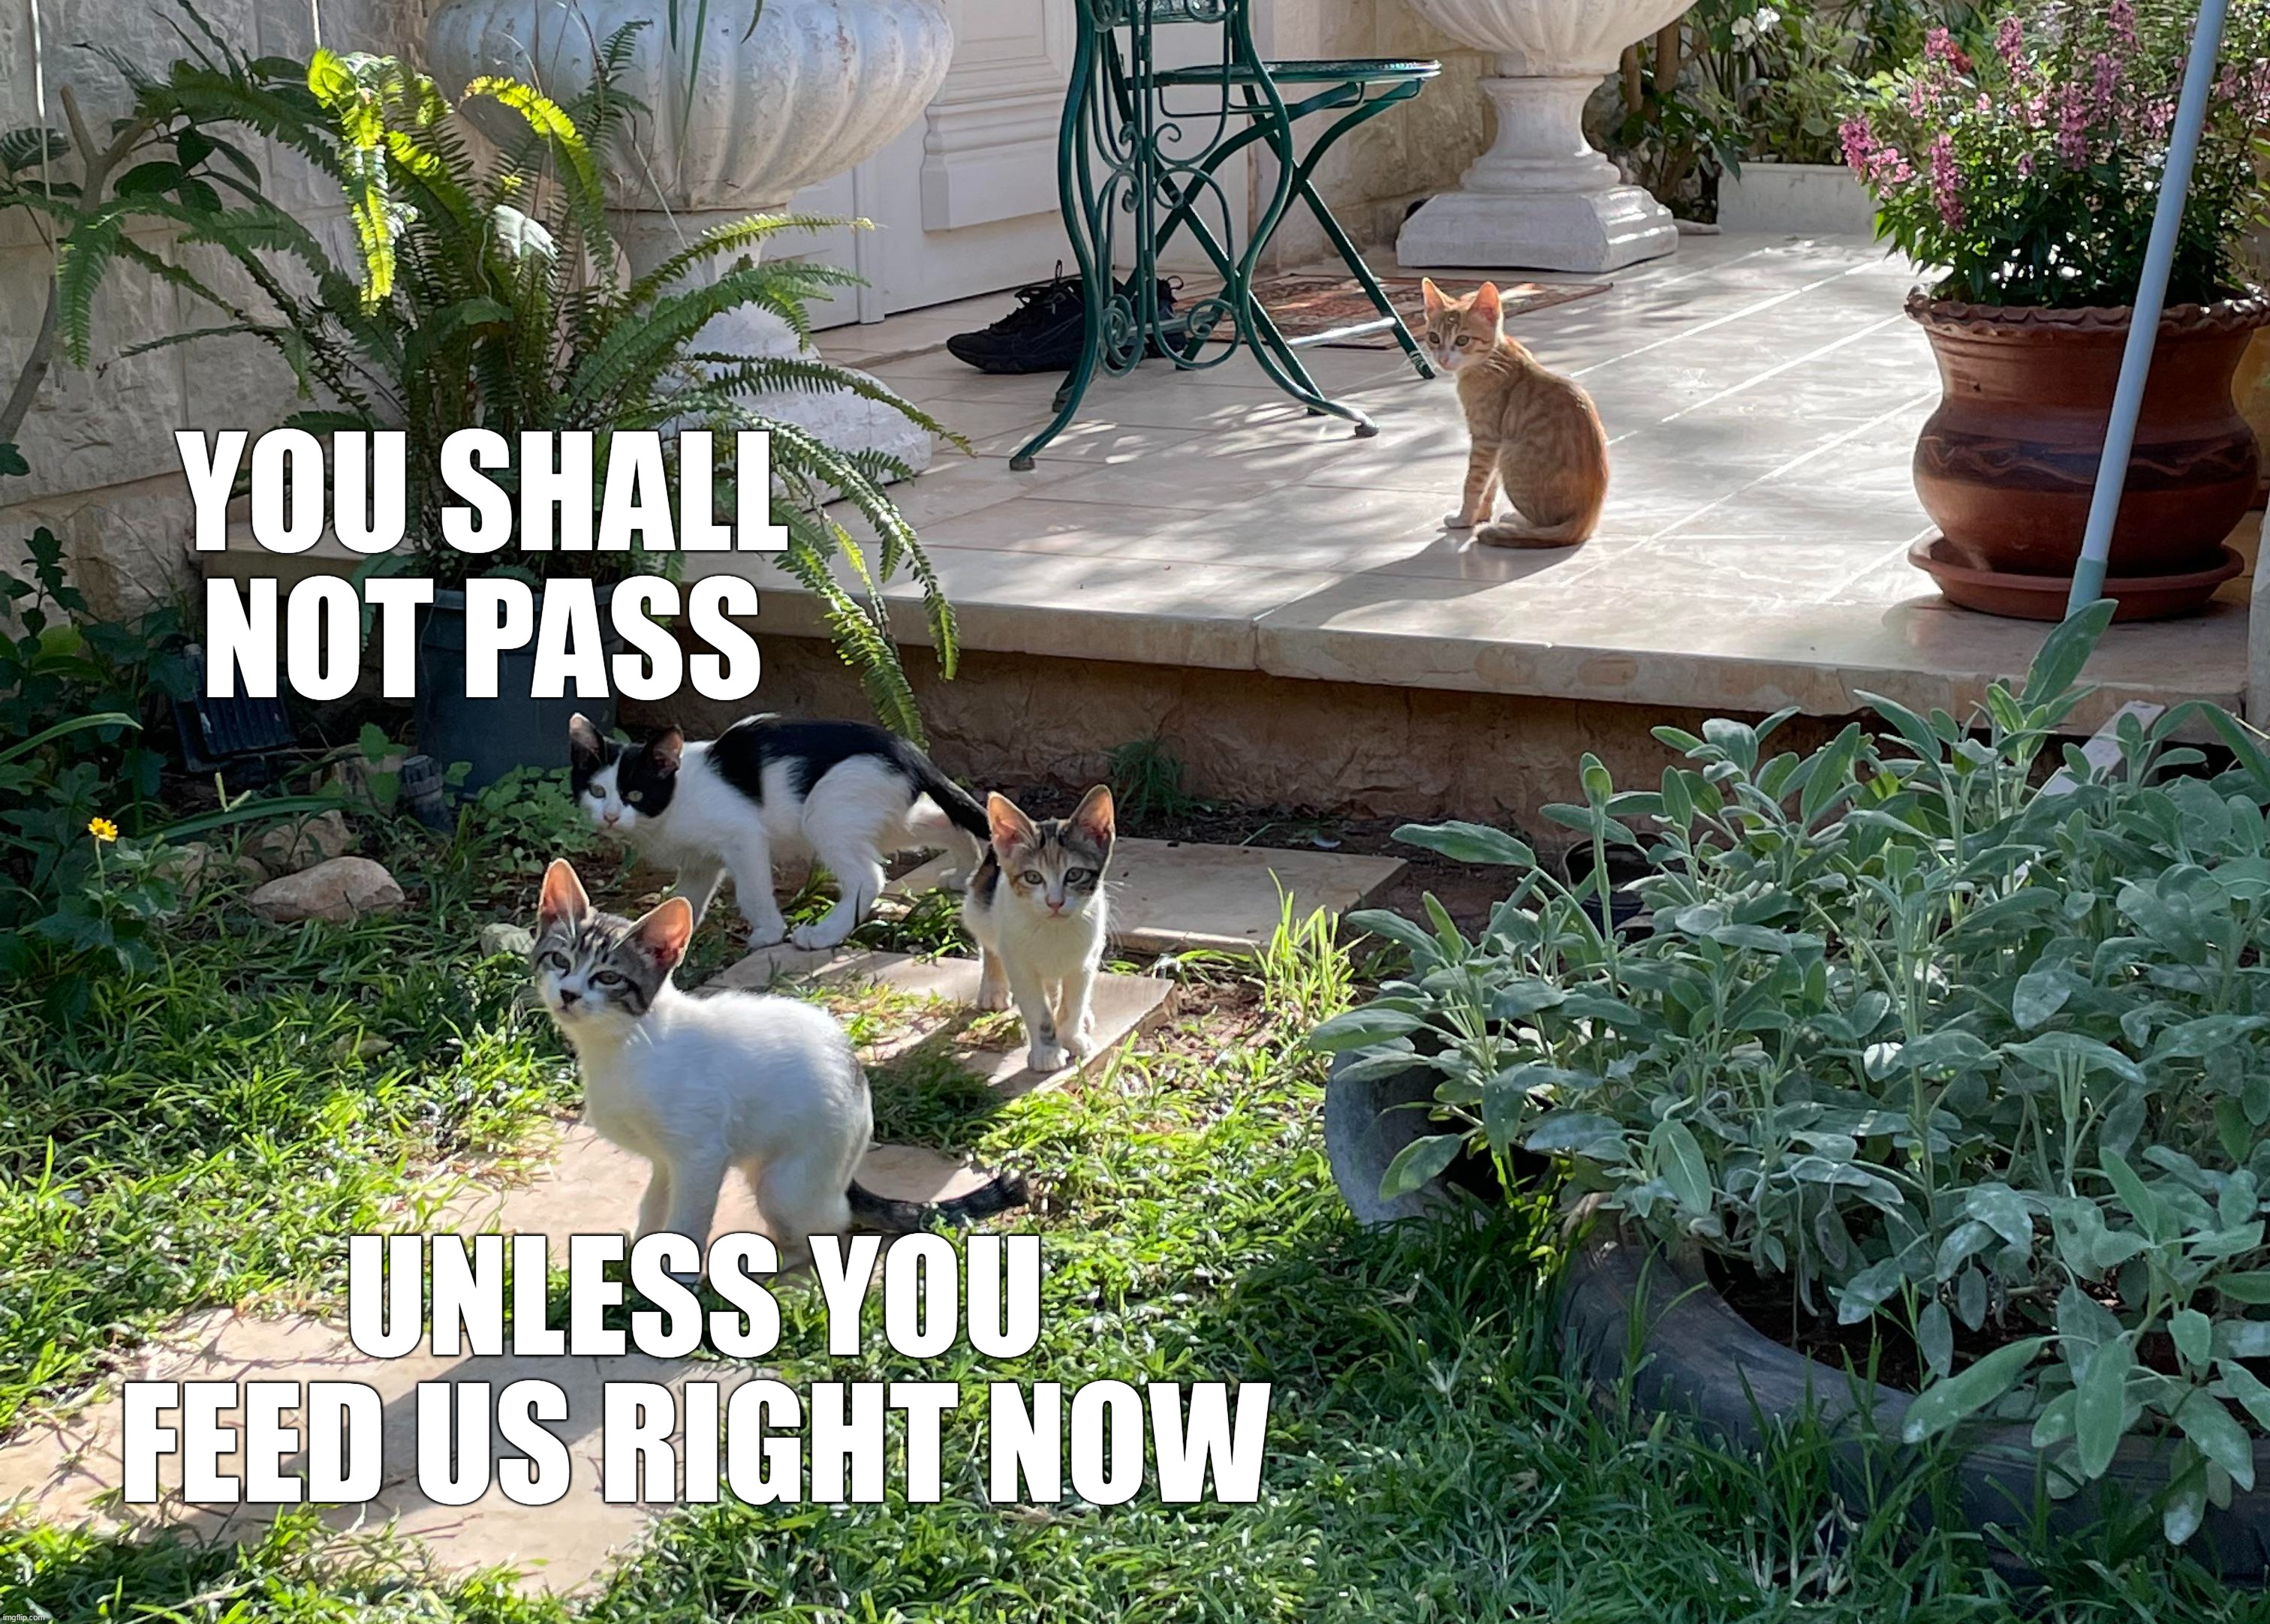  YOU SHALL NOT PASS; UNLESS YOU FEED US RIGHT NOW | image tagged in meme,memes,humor,cat,cats,funny | made w/ Imgflip meme maker